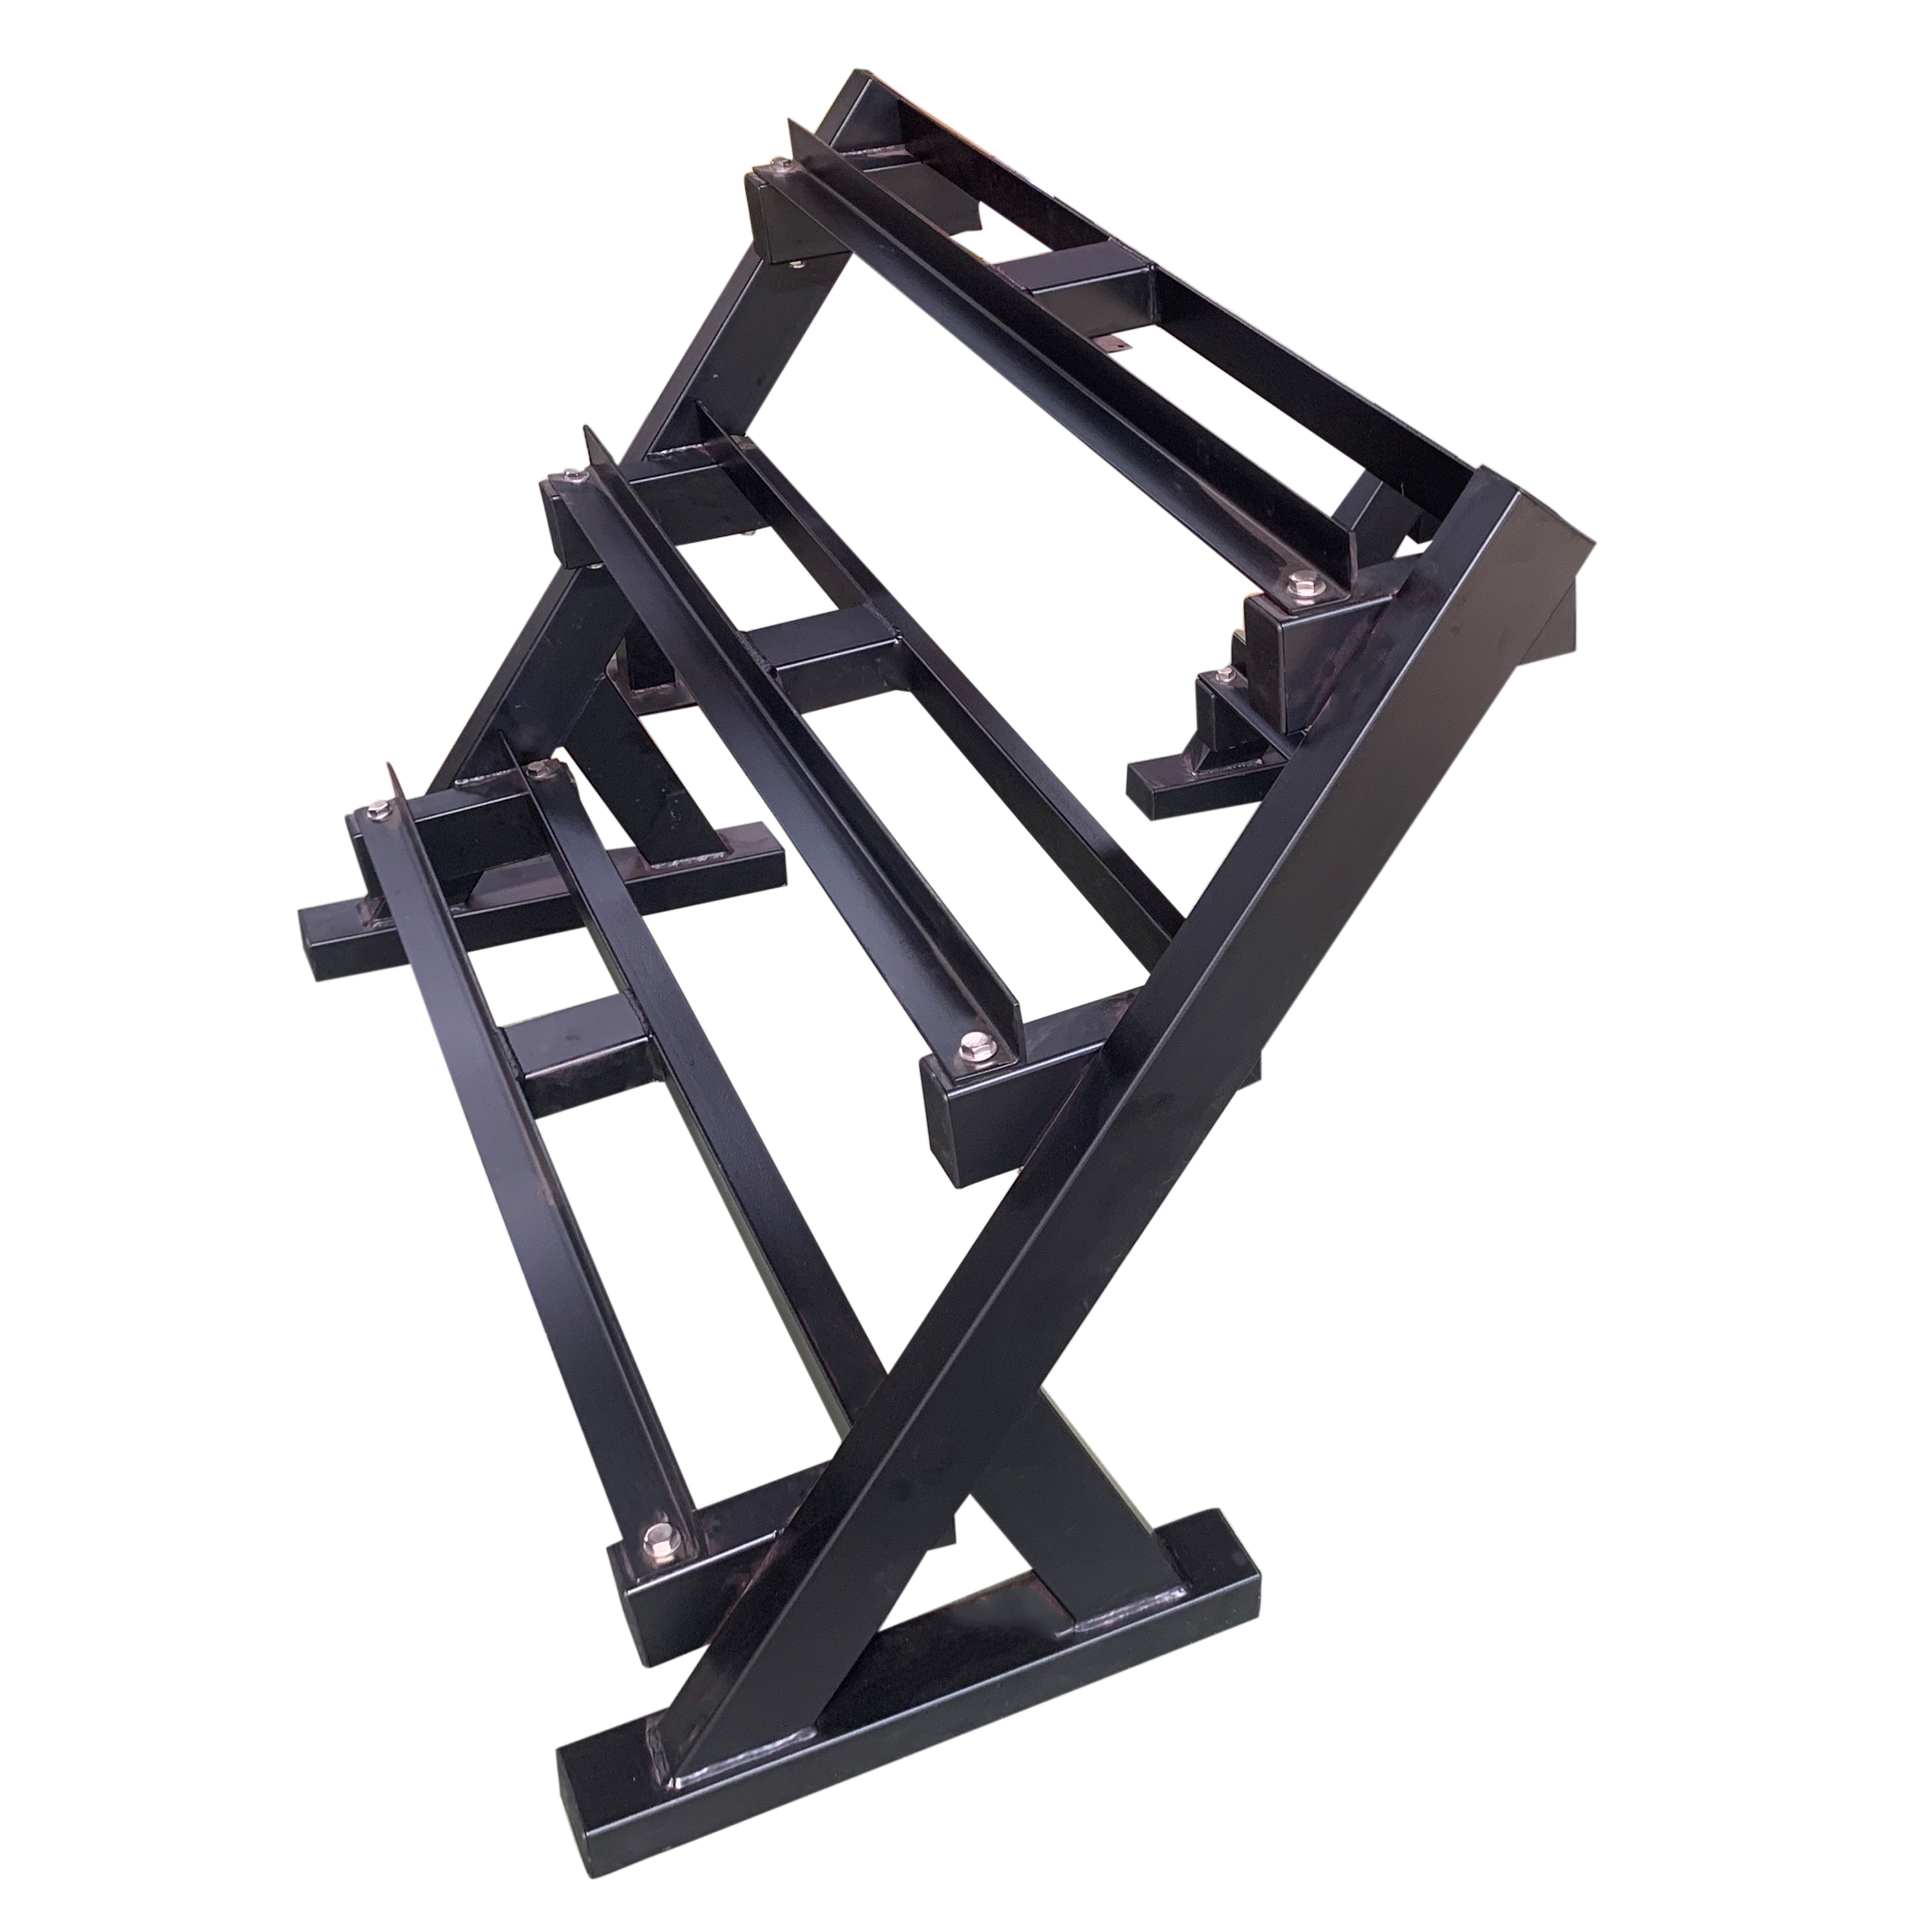 3 Tier Stand Dumbbell Rack for Gym Weight Storage